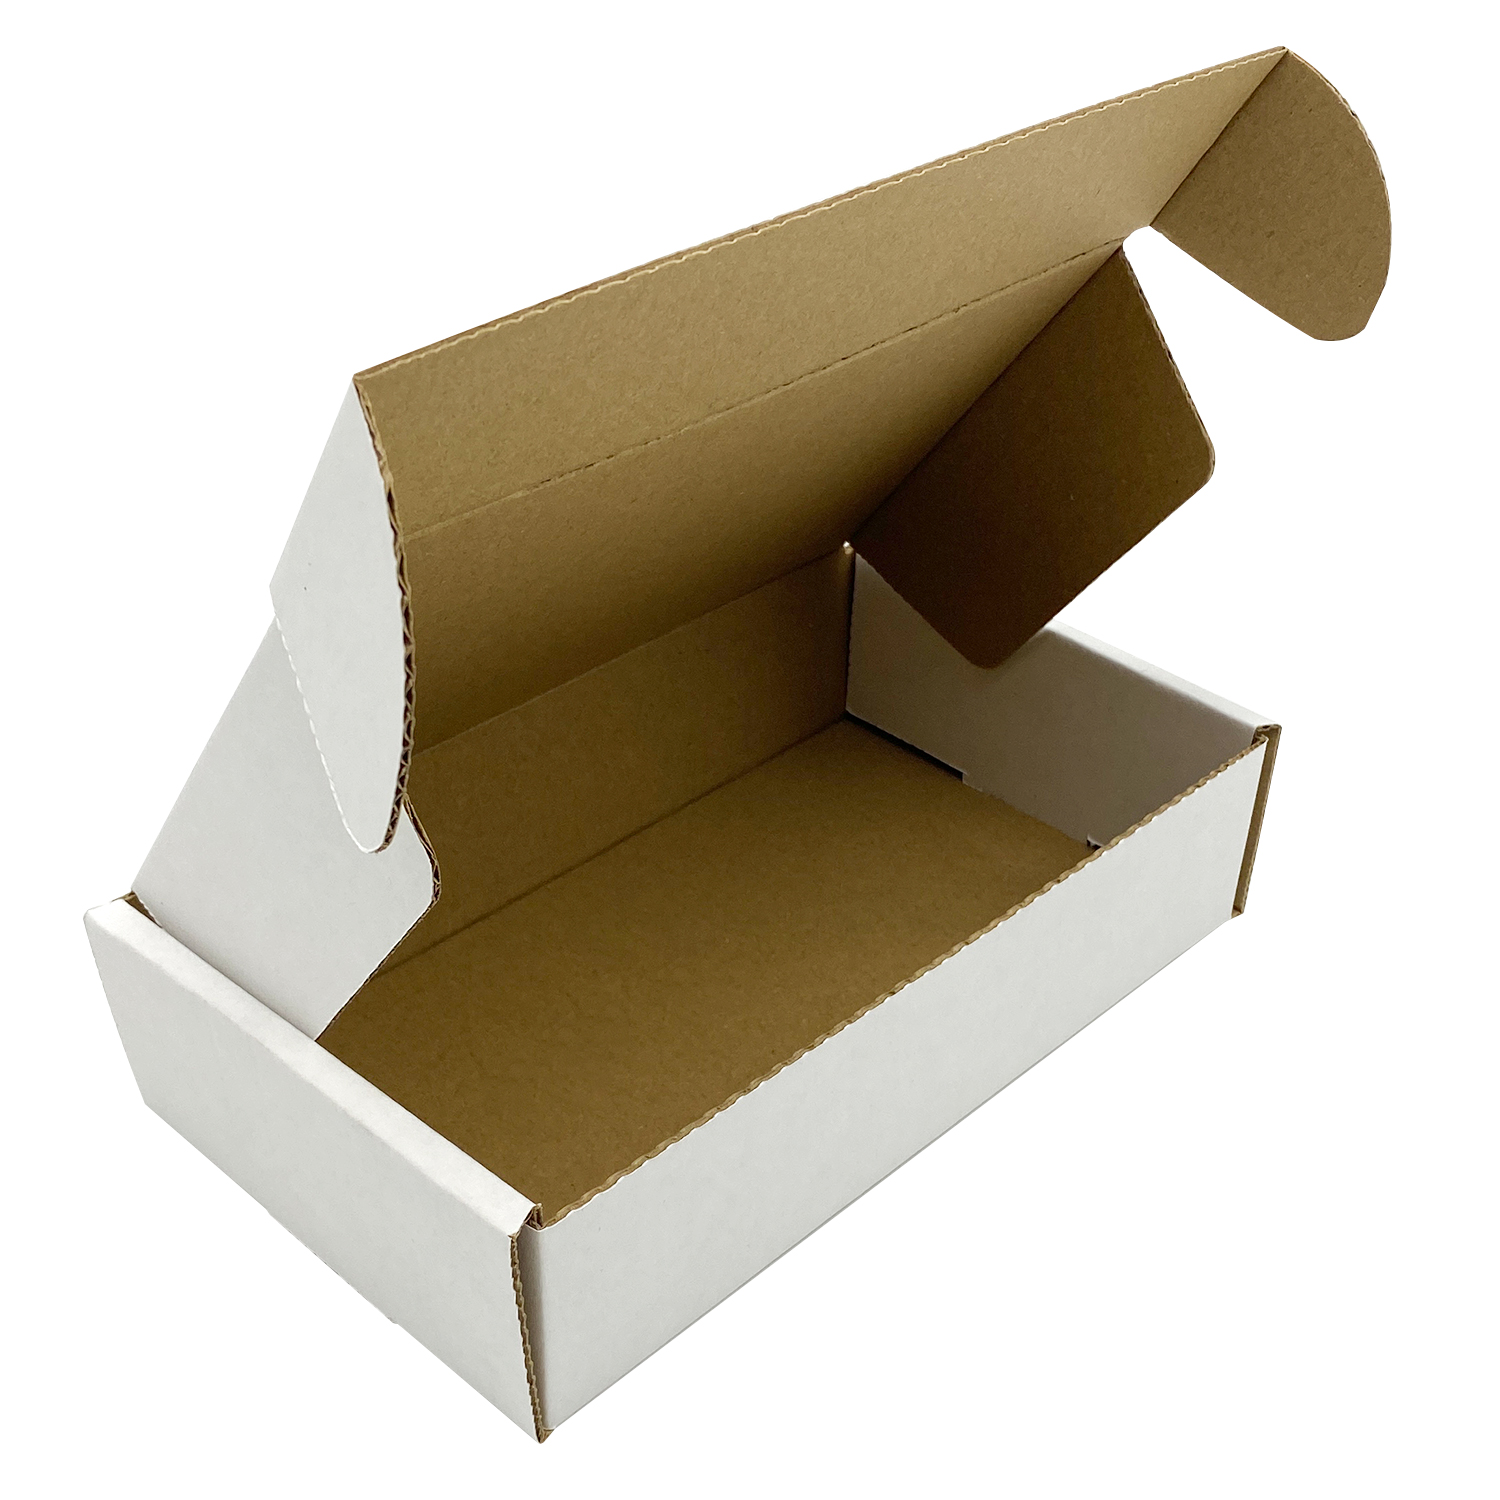 Small Parcel Postal Boxes – White (200mm x 120mm x 50mm)